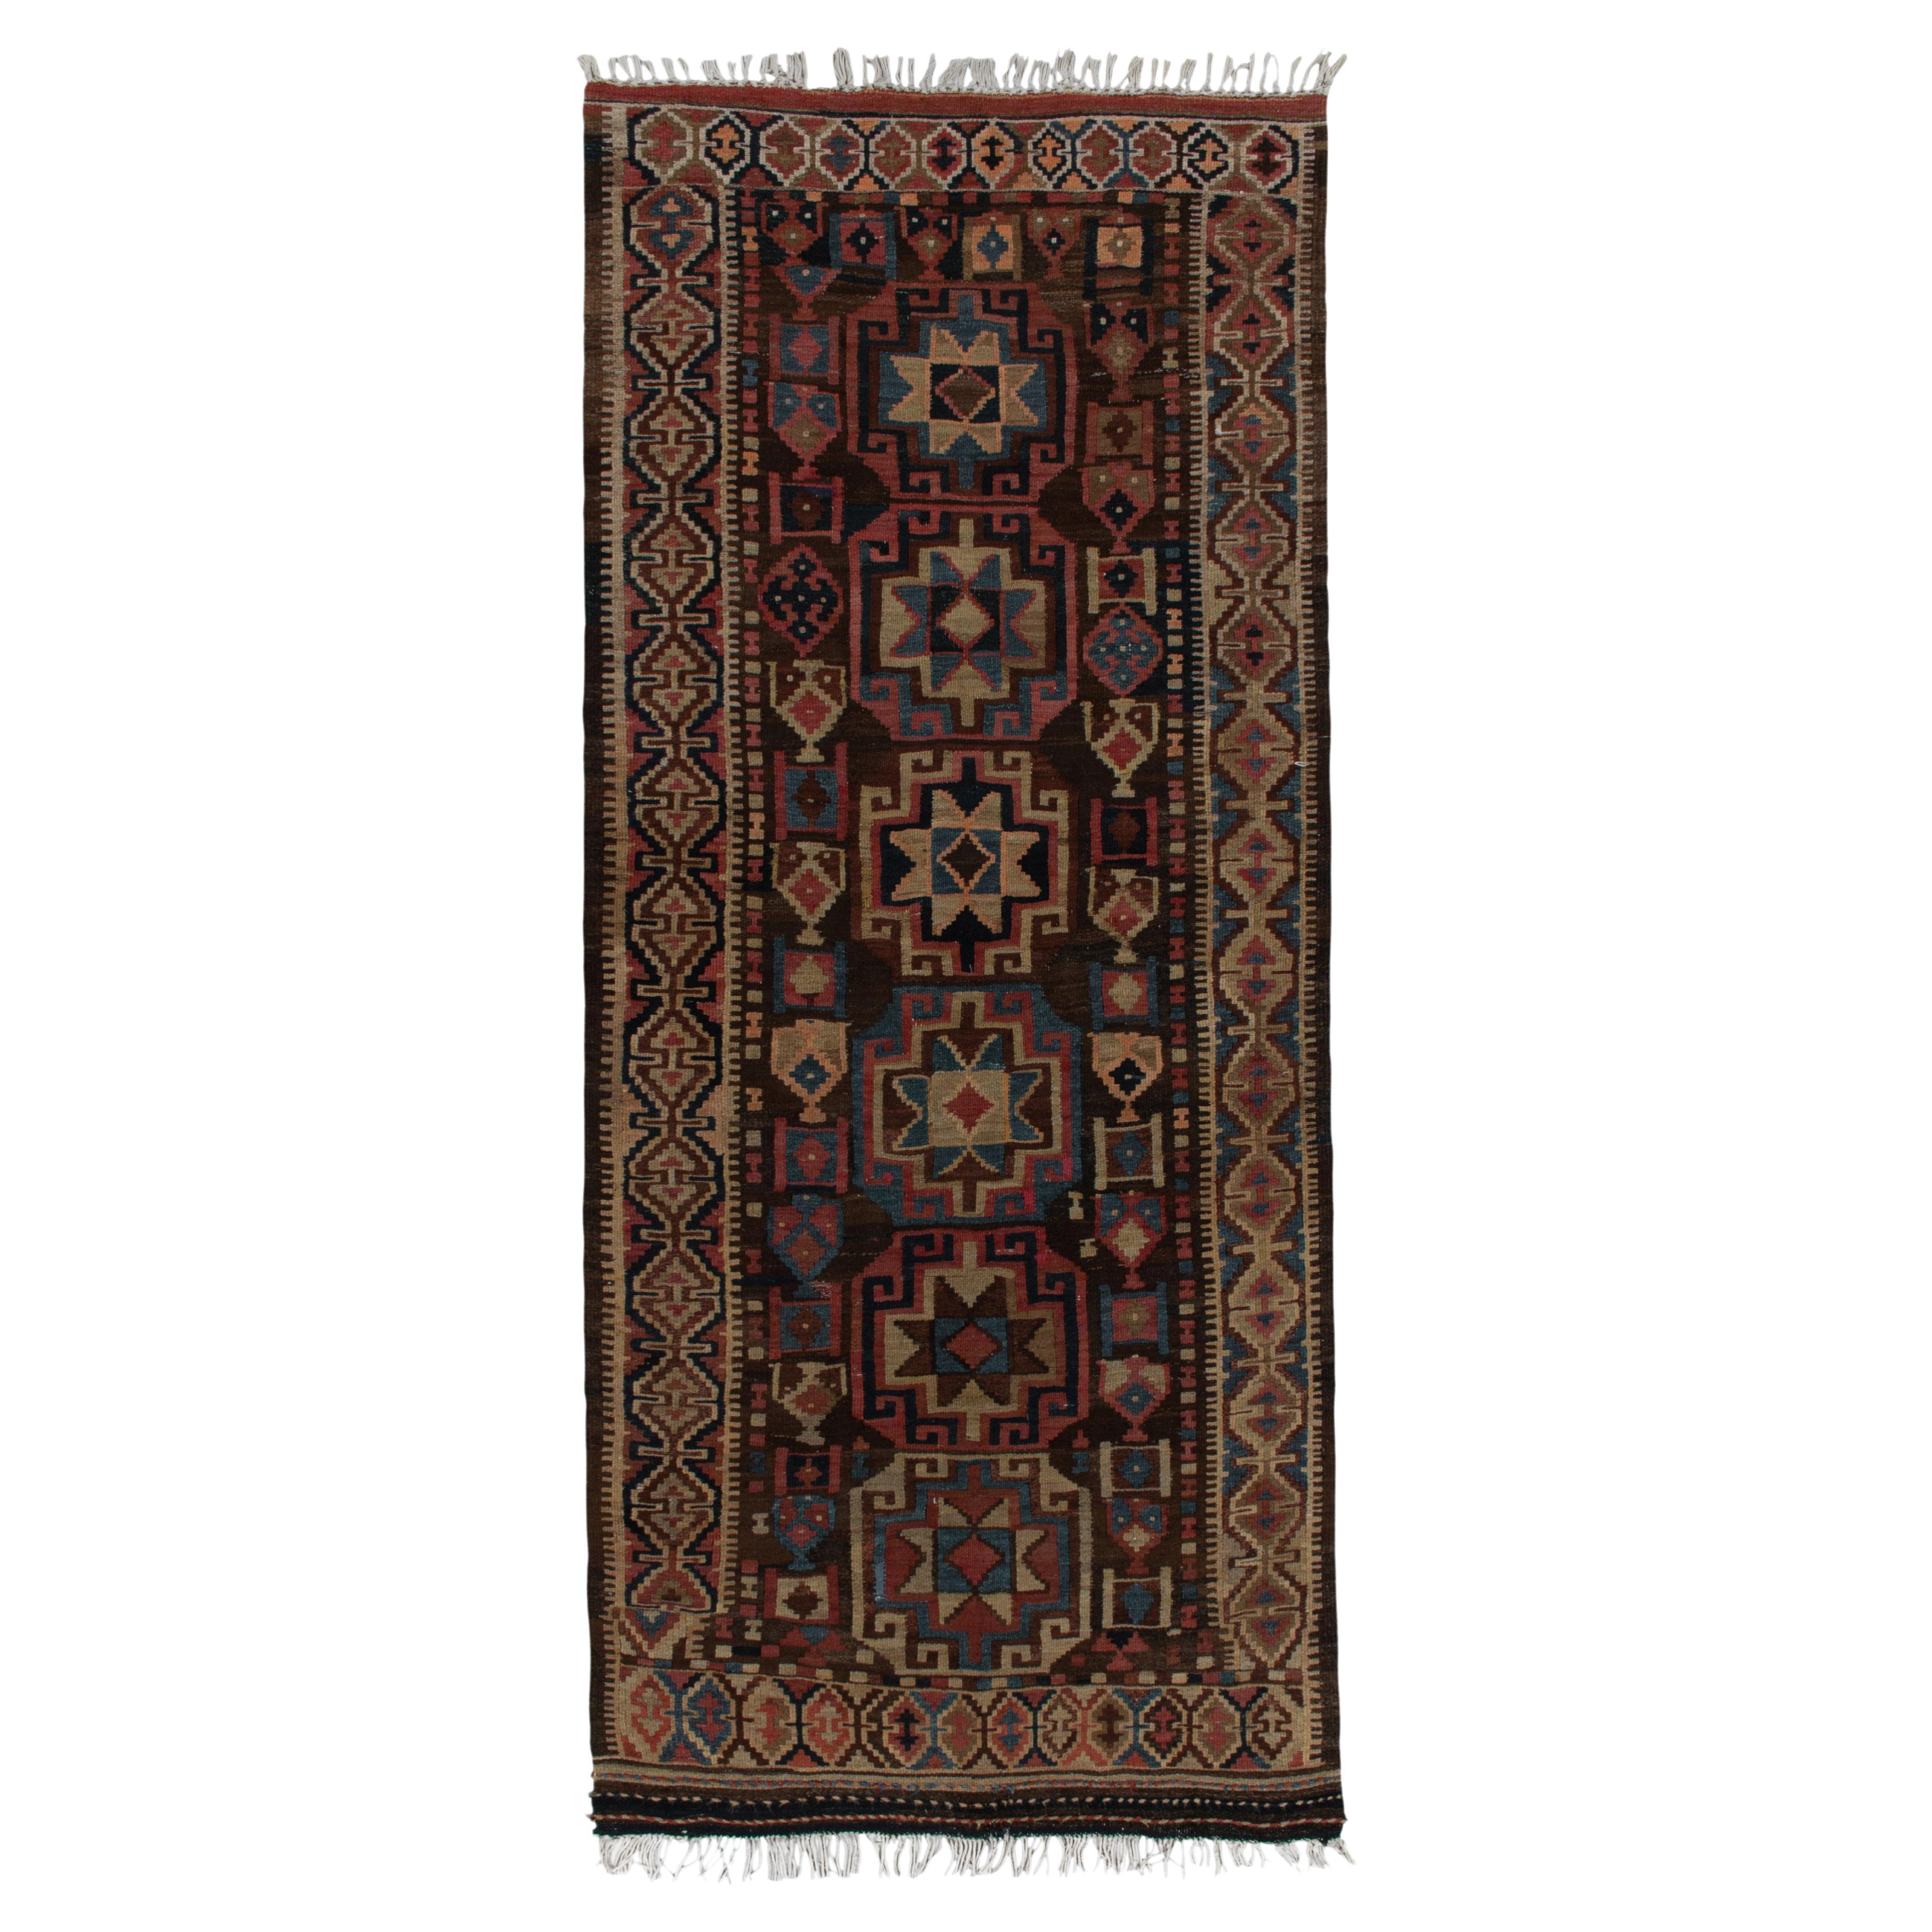 Antique Kurdish Kilim Runner in Brown With Geometric Patterns, From Rug & Kilim For Sale